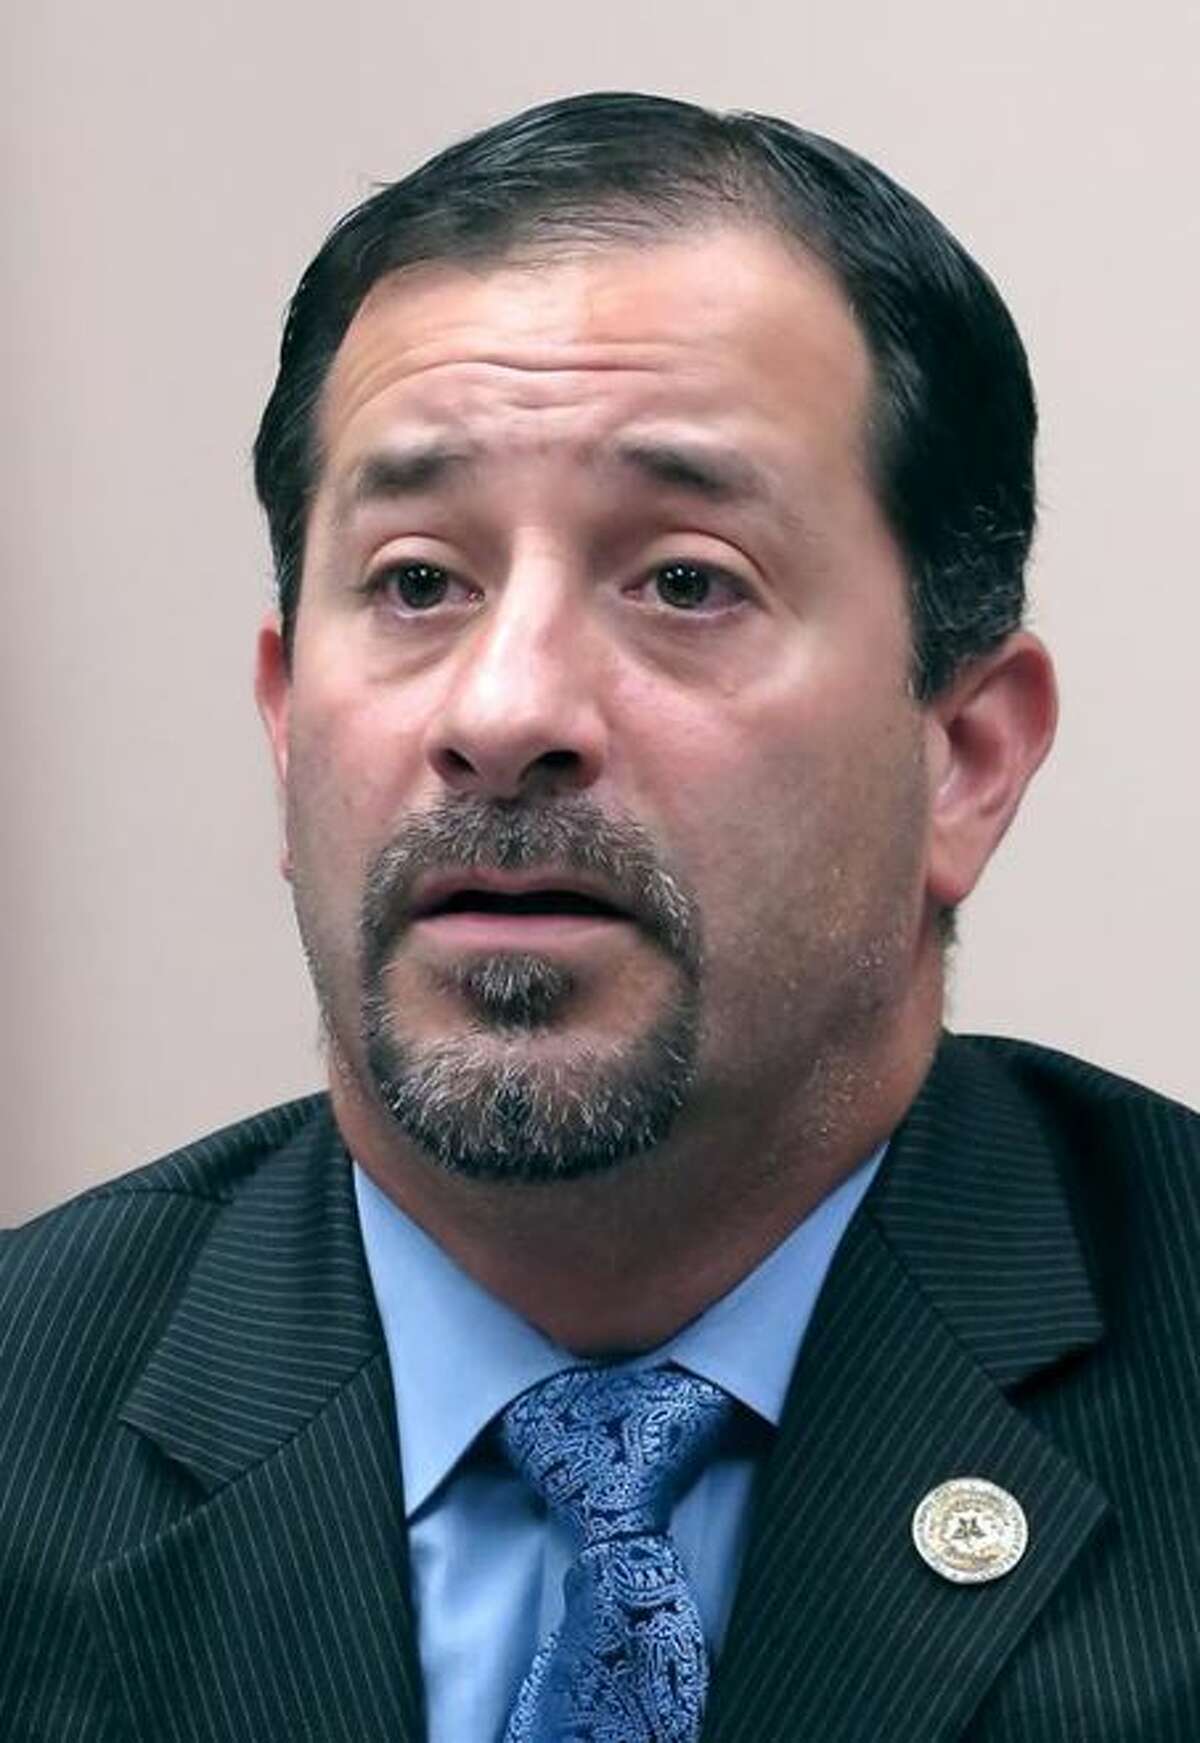 County Attorney Marco Montemayor's temporary restraining order was filed and granted on Friday